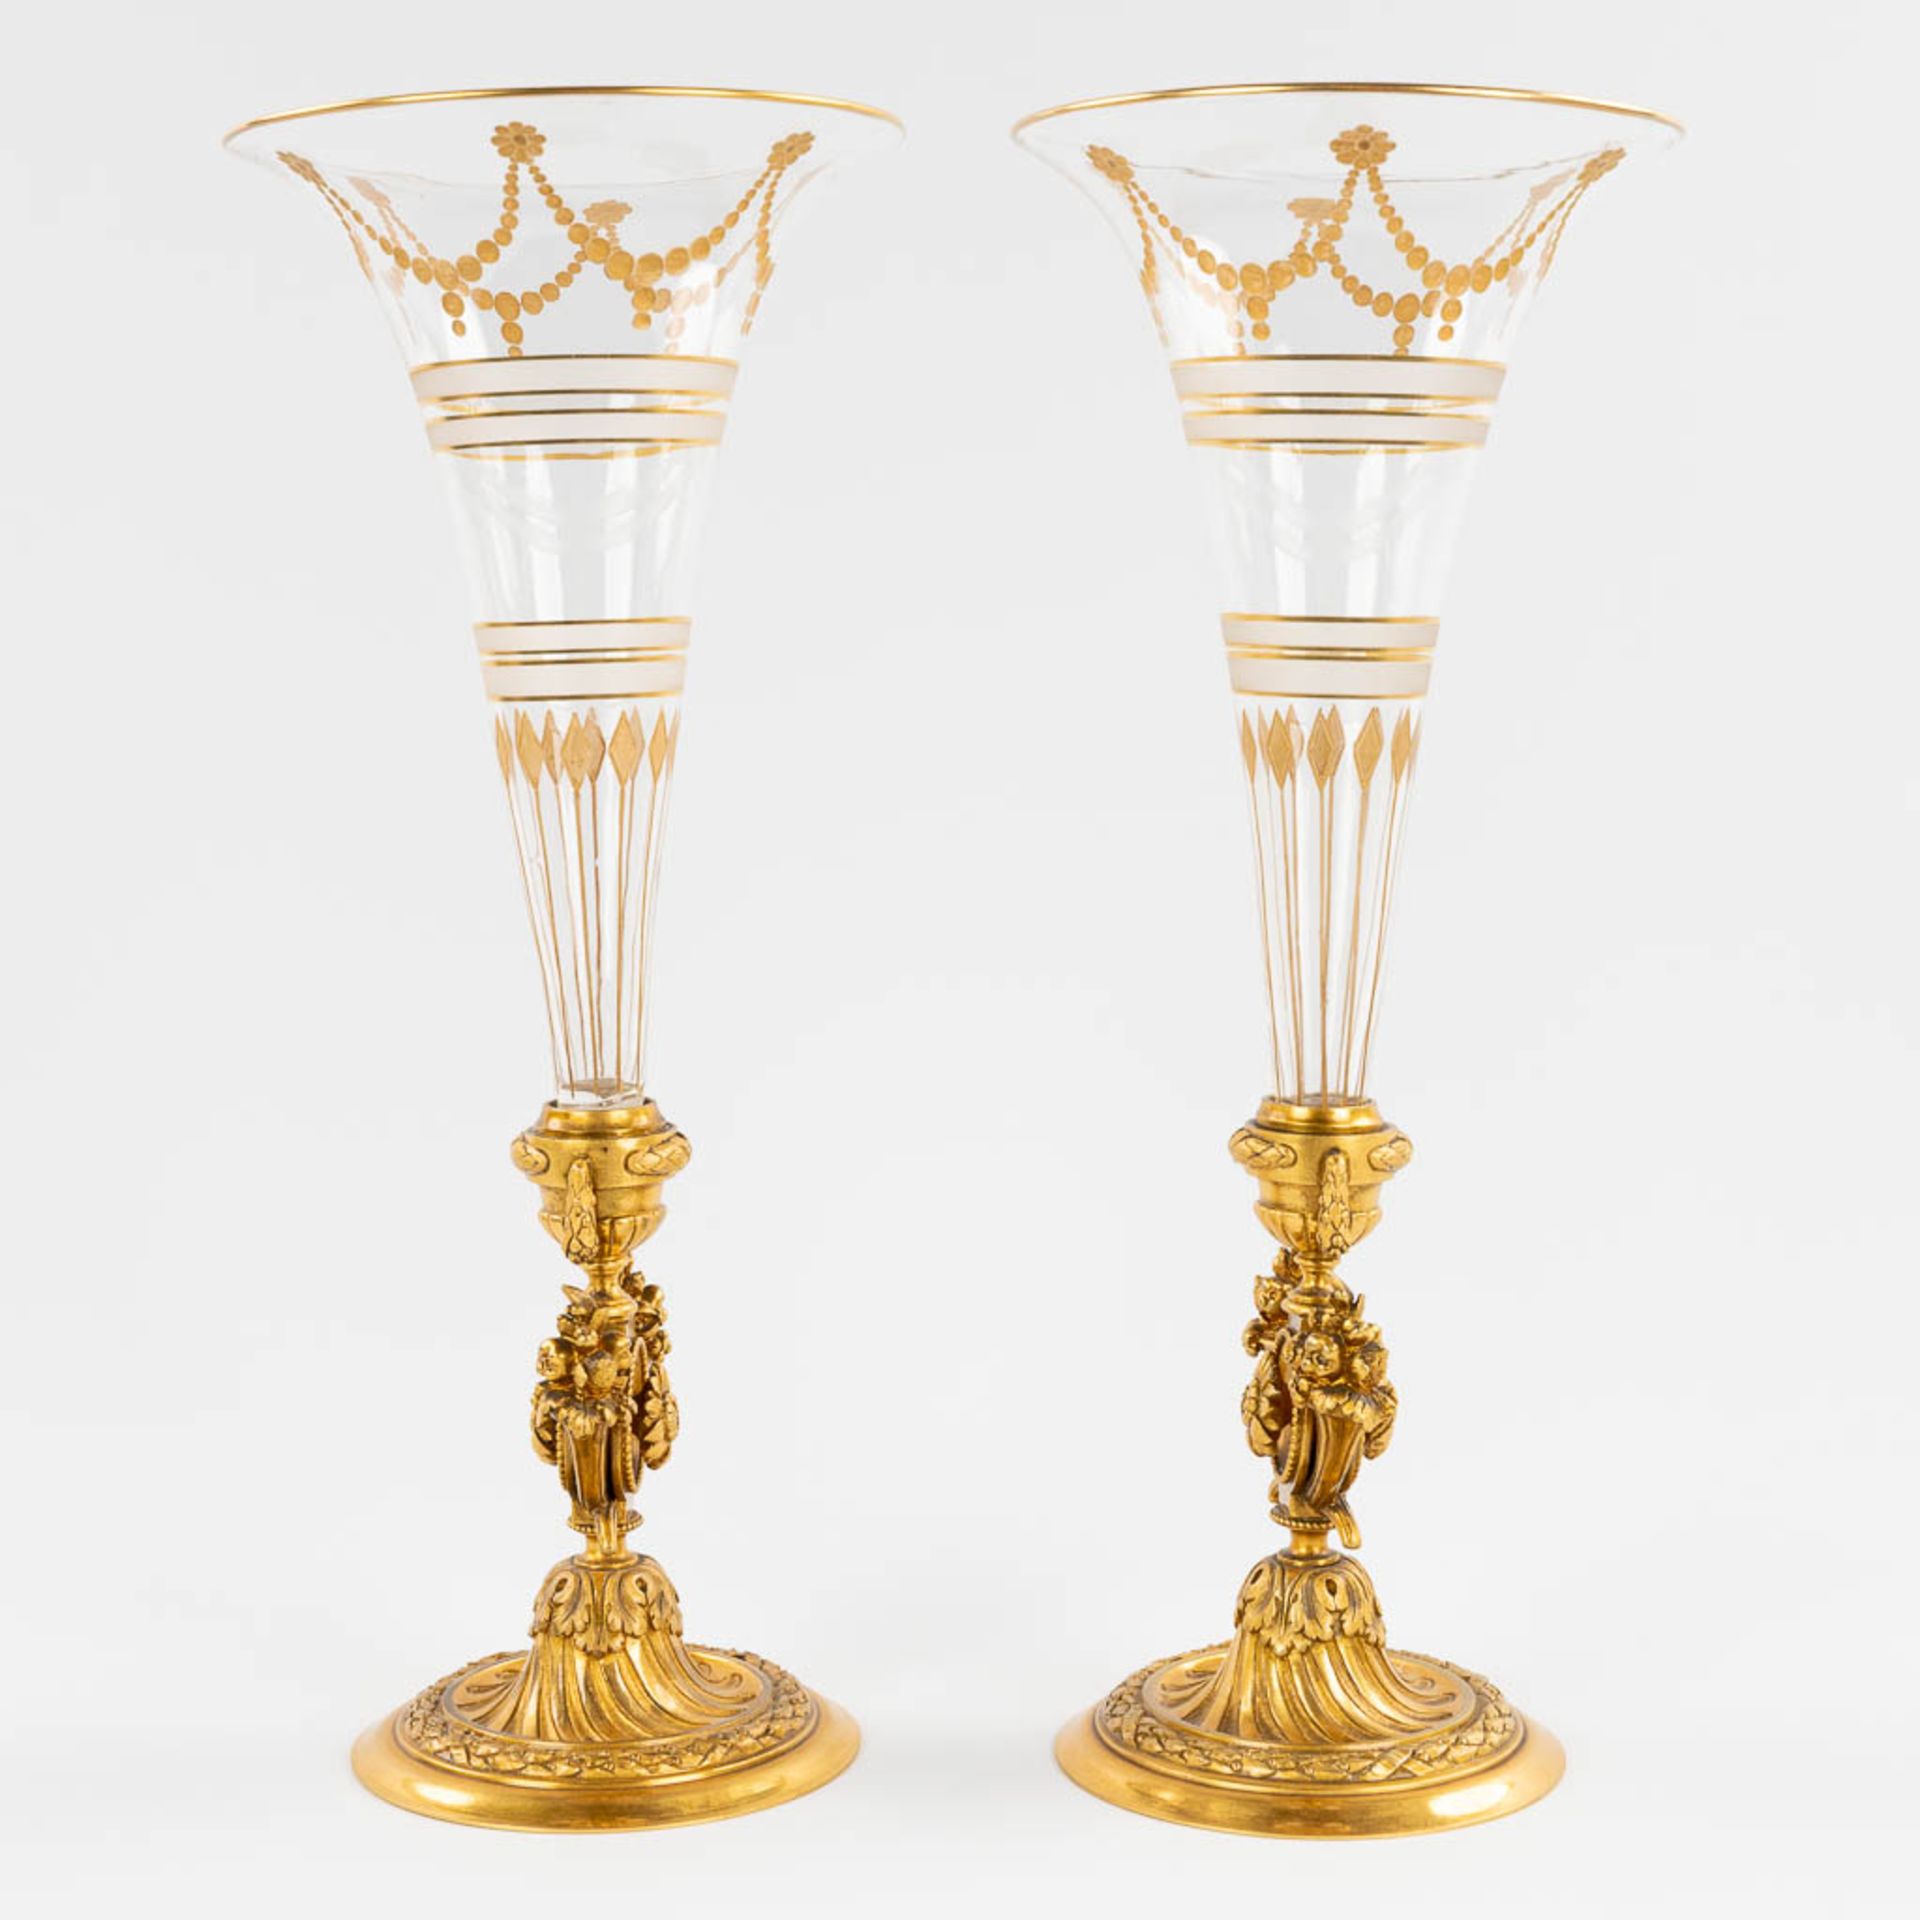 A pair of trumpet vases, gilt bronze and glass in Louis XVI style. 19th C. (H:31,5 x D:13 cm) - Image 5 of 13